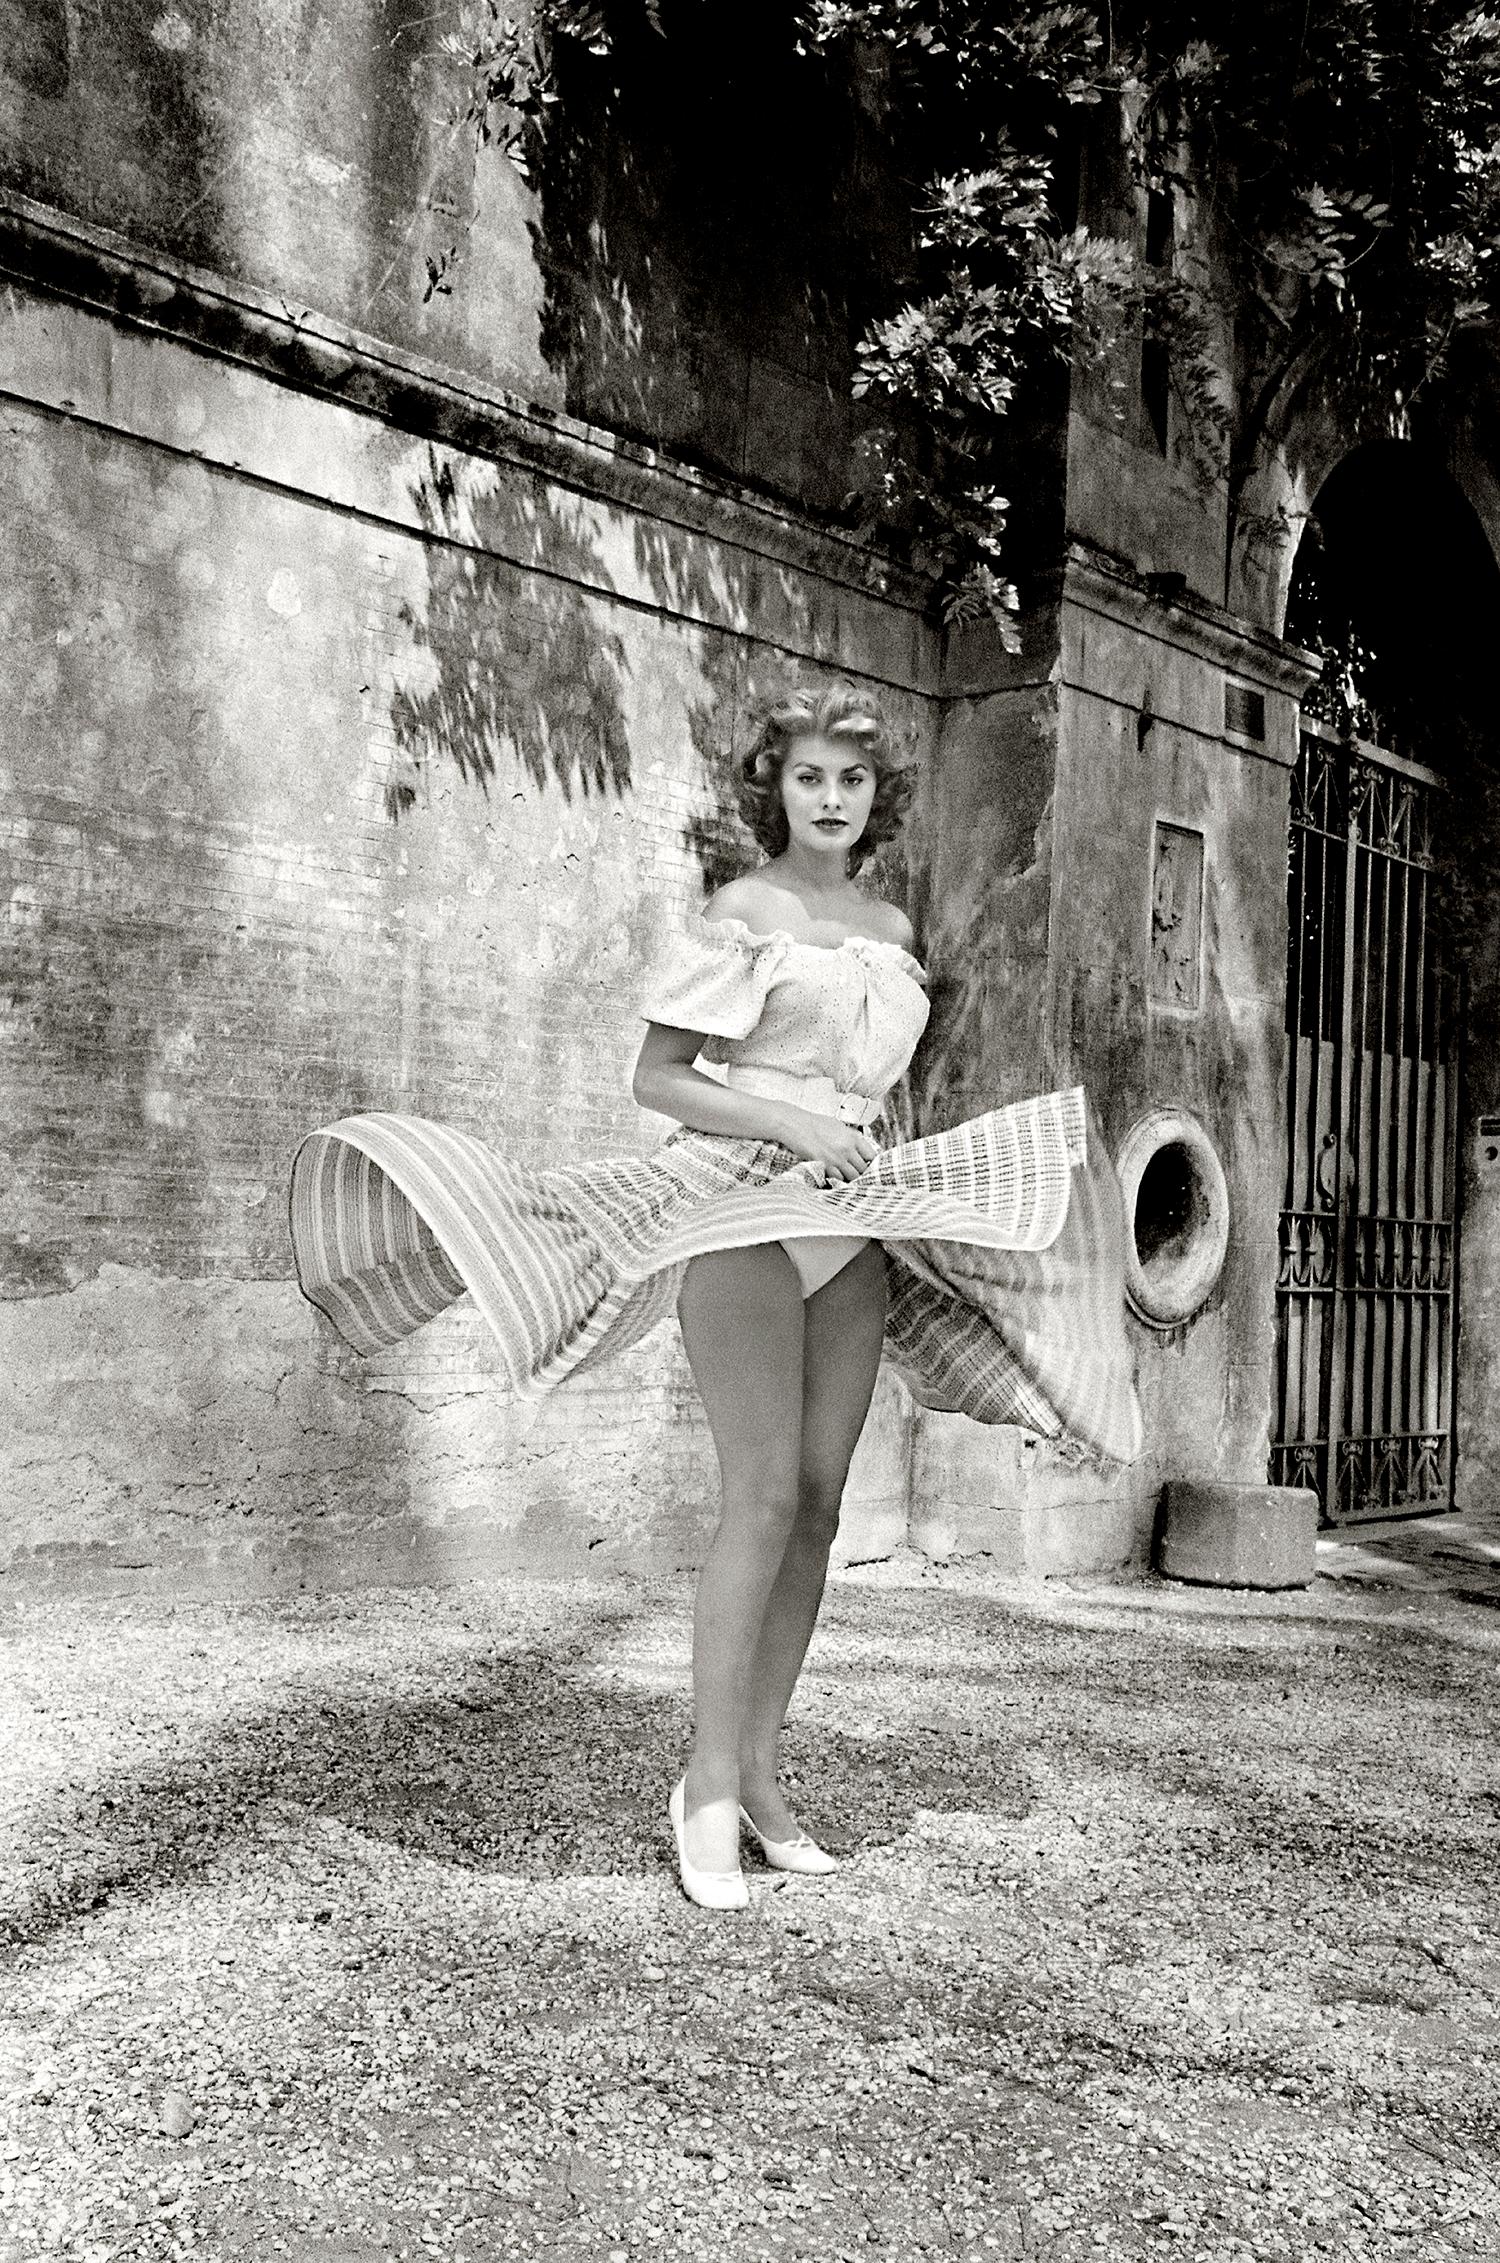 Ormond Gigli Black and White Photograph - Sophia, 1955 Rome (Twirling) 